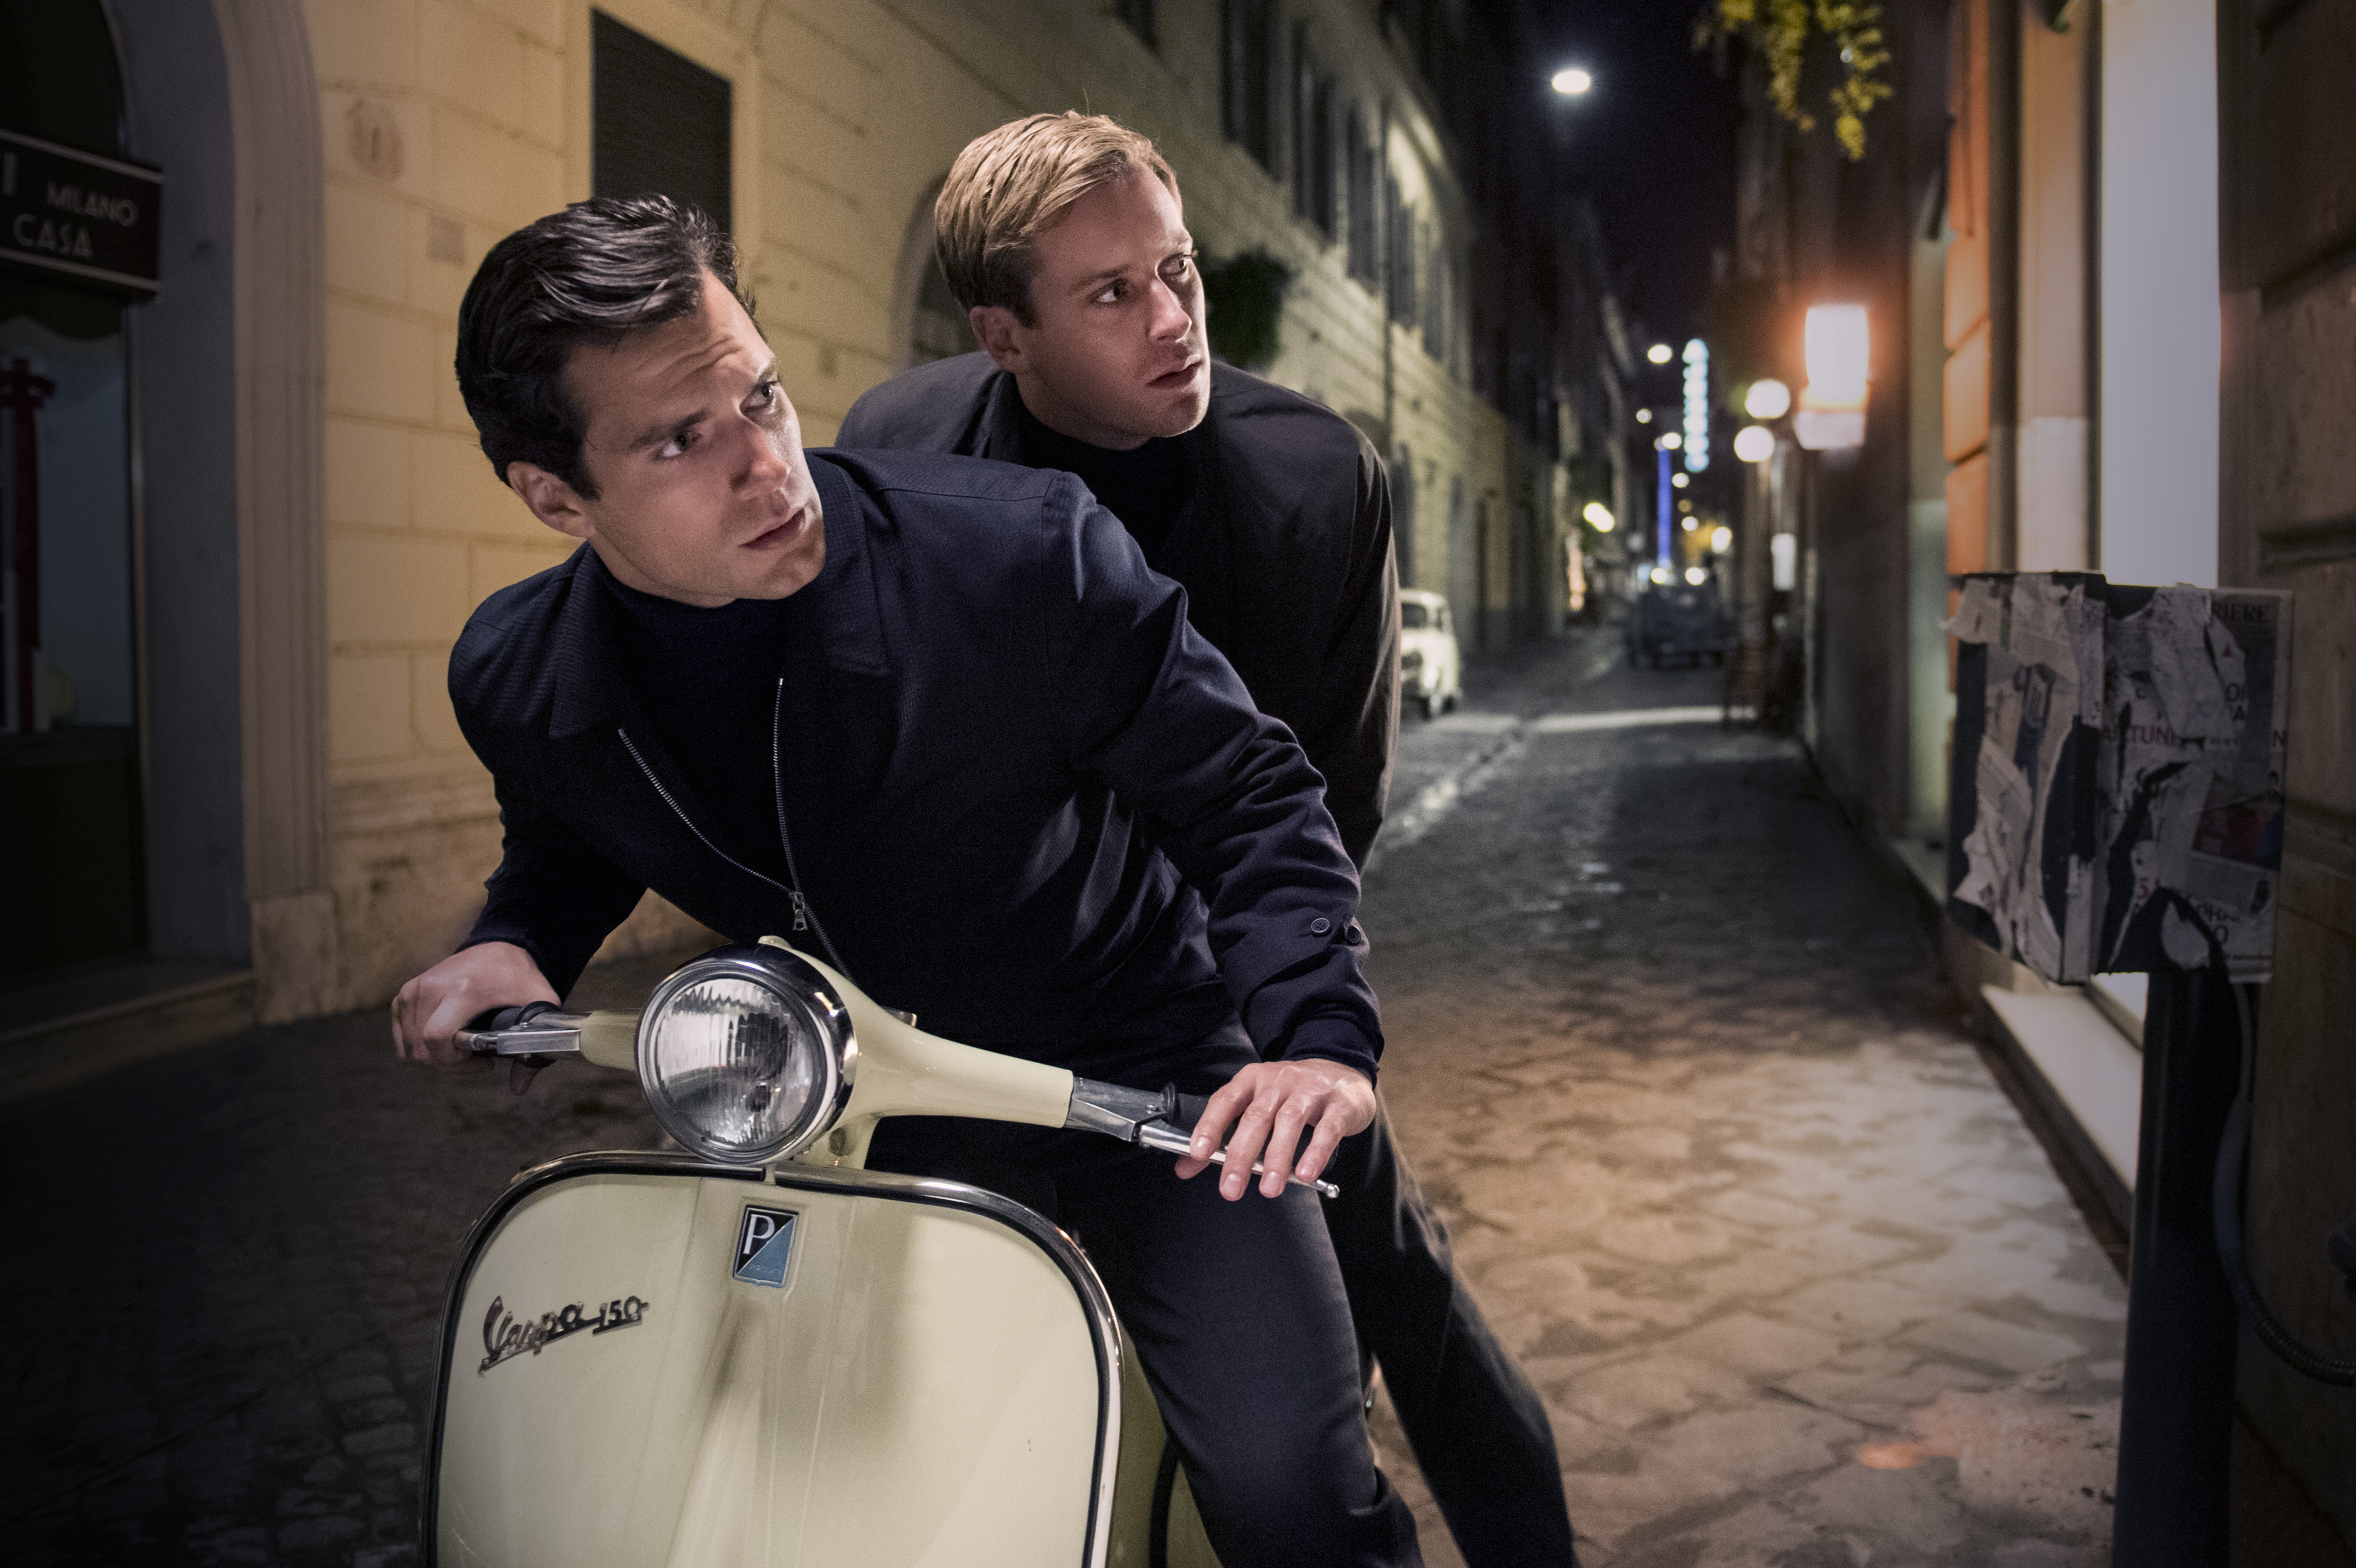 Movie The Man from U.N.C.L.E. HD Wallpaper | Background Image